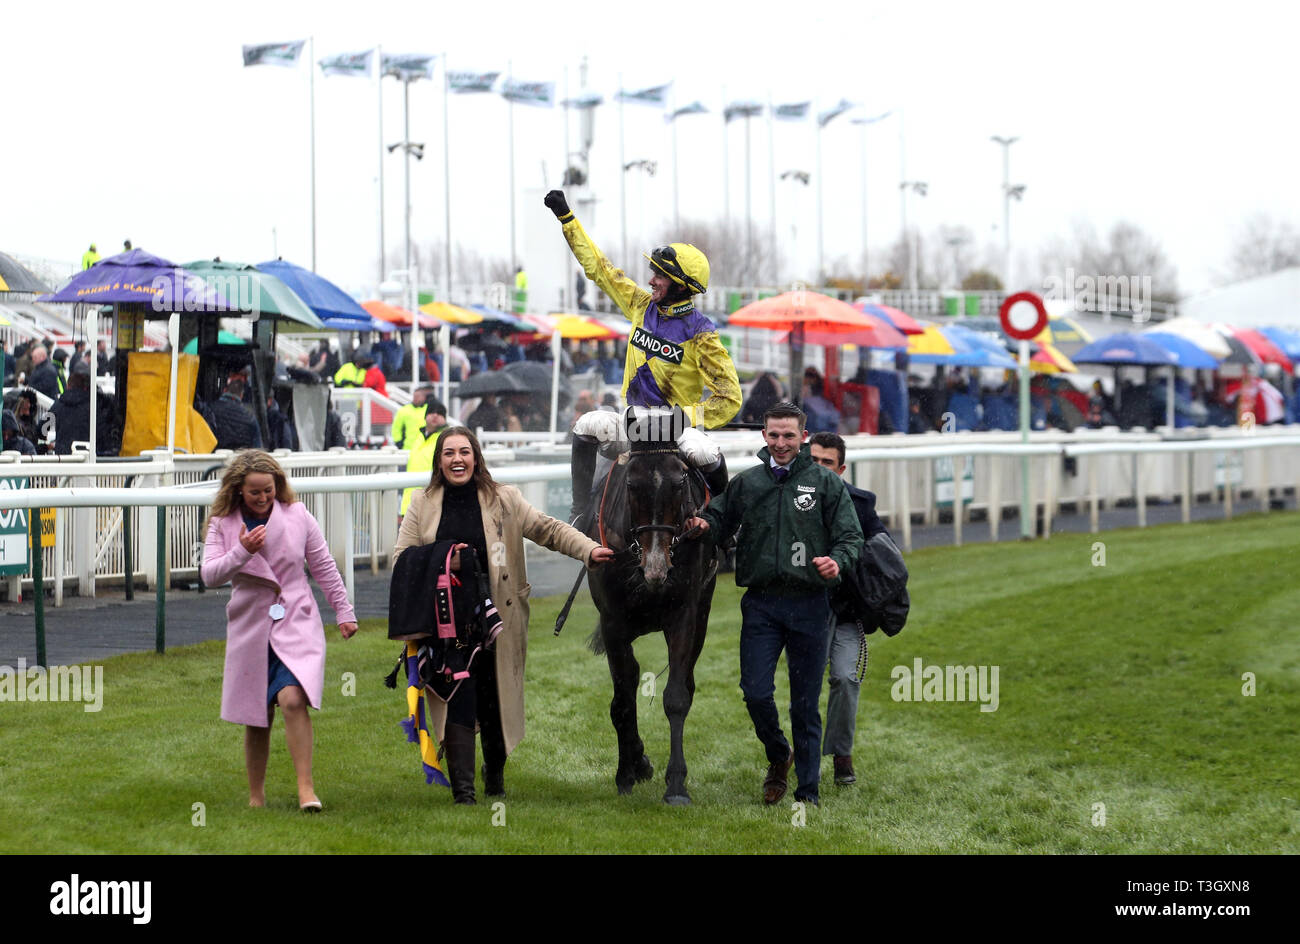 Kalashnikov ridden by Jack Quinlan with connections after winning the Devenish Manifesto Novices Chase during Grand National Thursday of the 2019 Randox Health Grand National Festival at Aintree Racecourse. Stock Photo